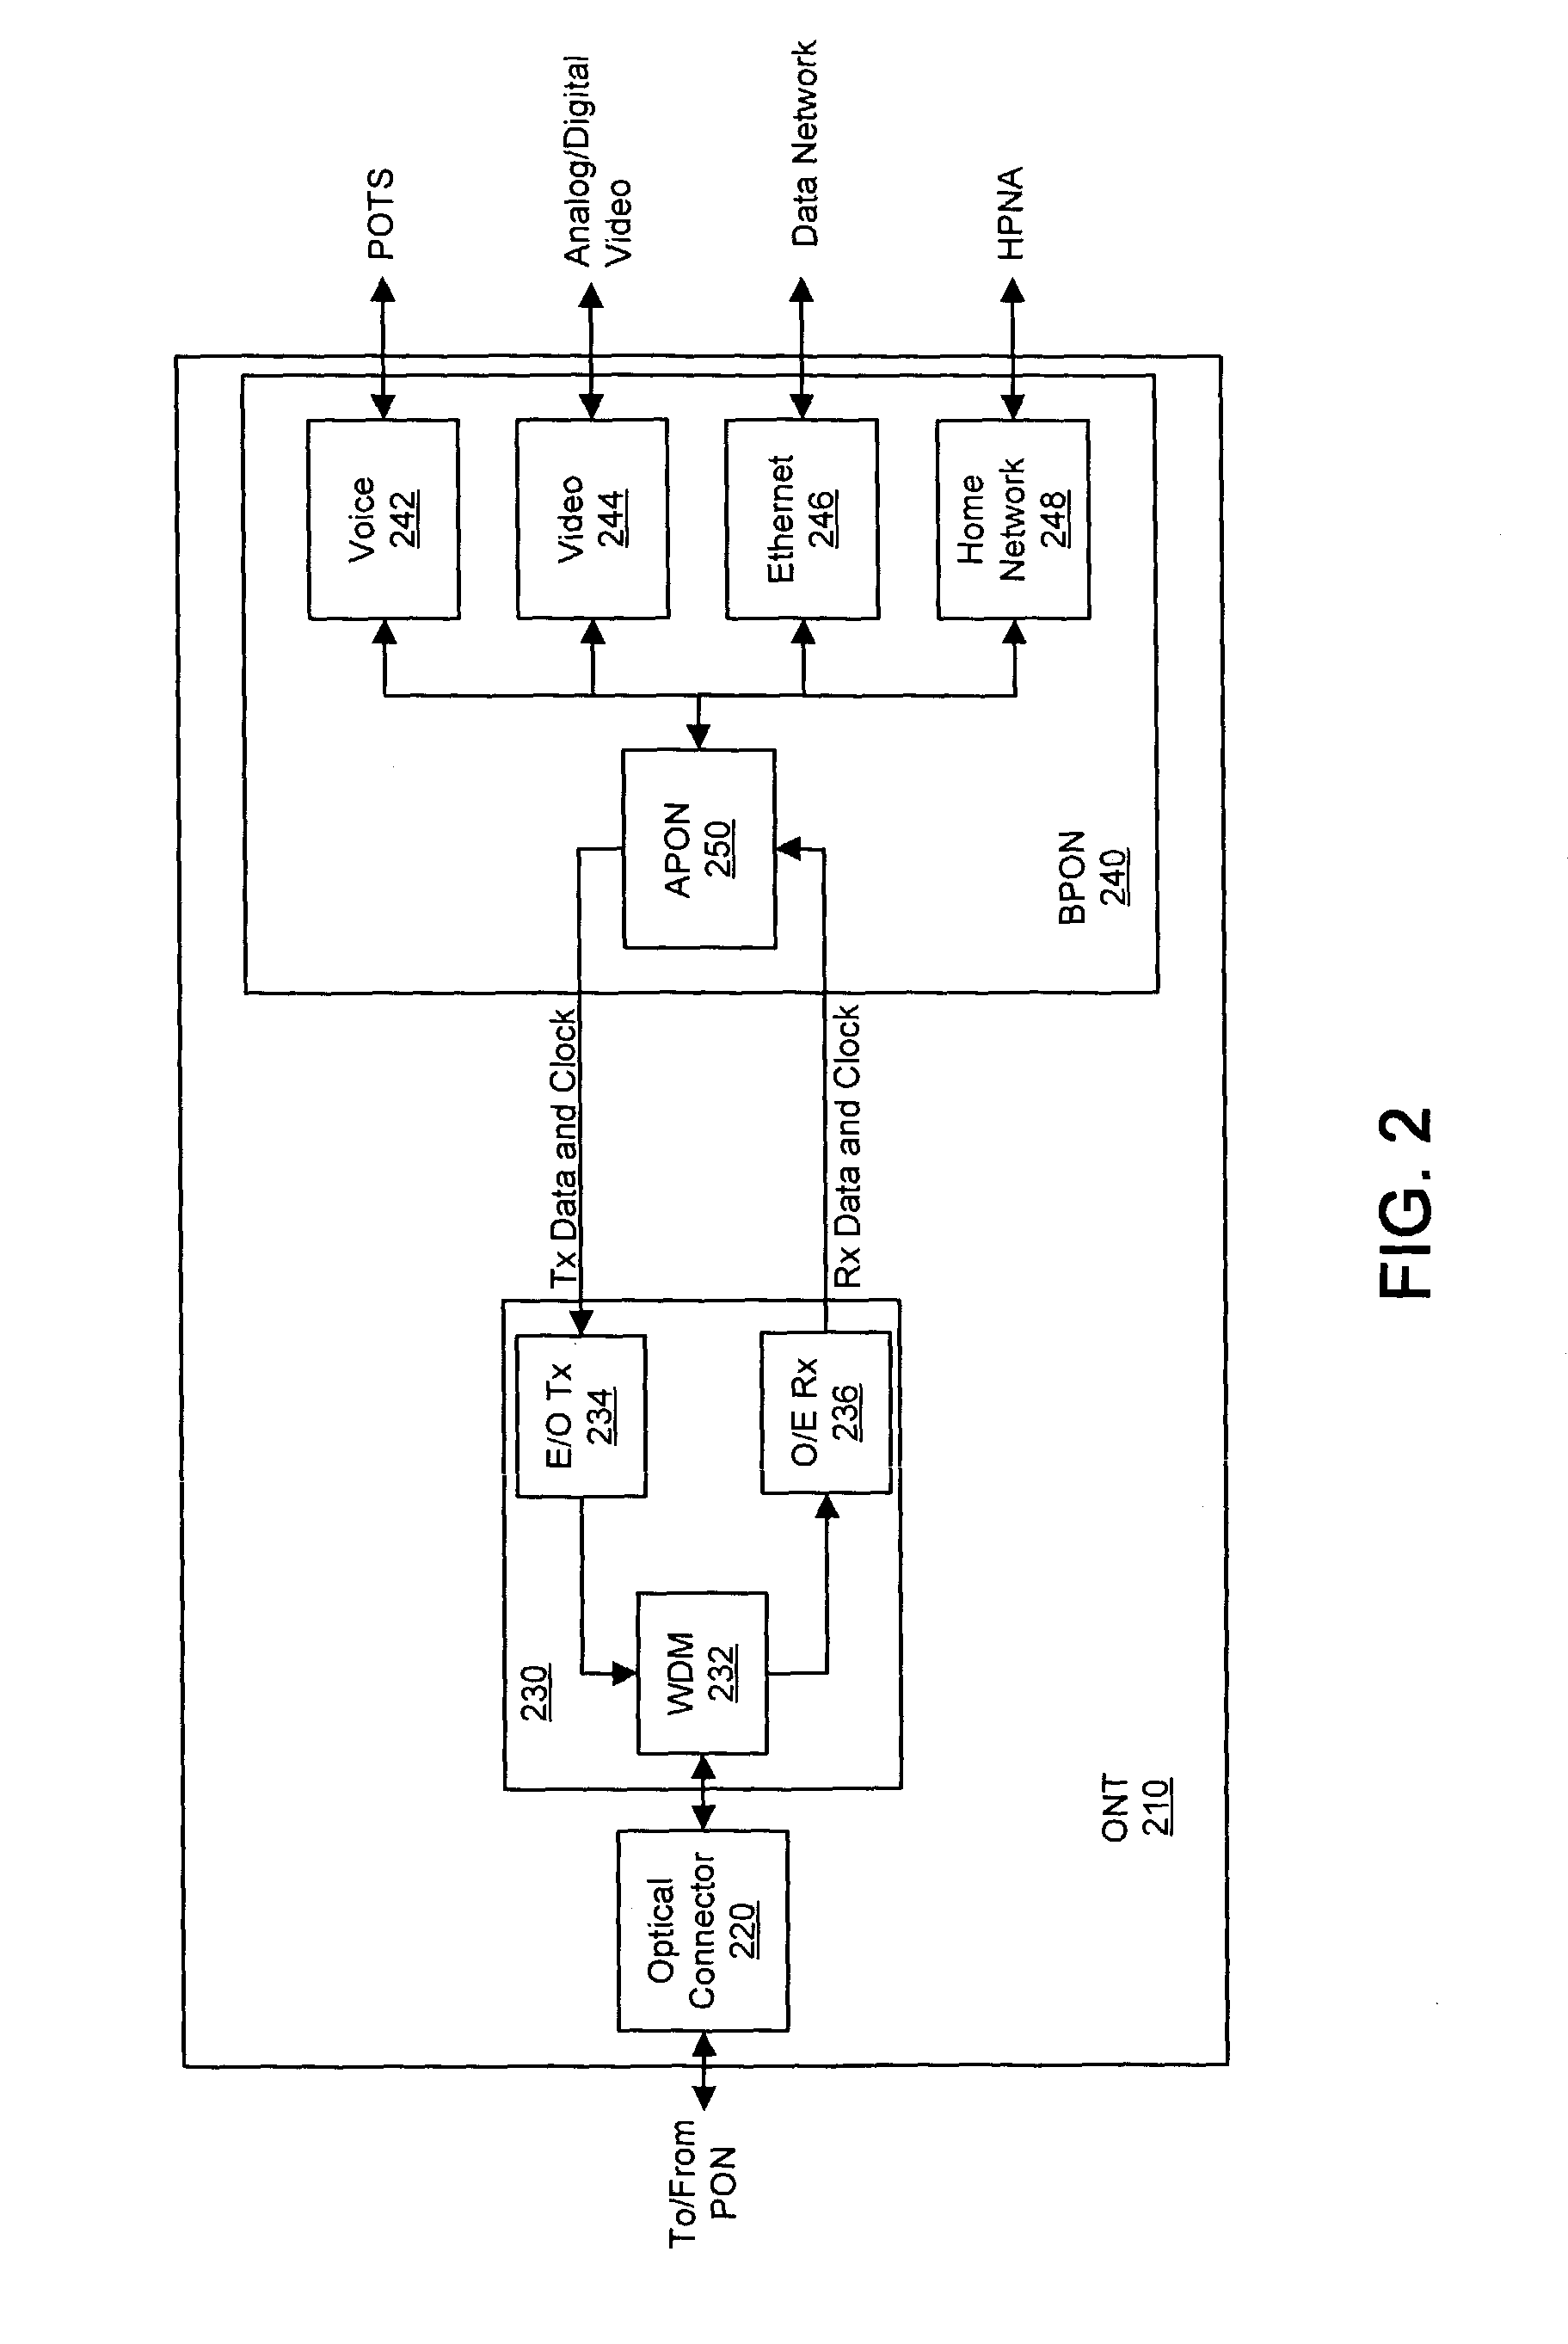 System and method for improved data protection in PONs